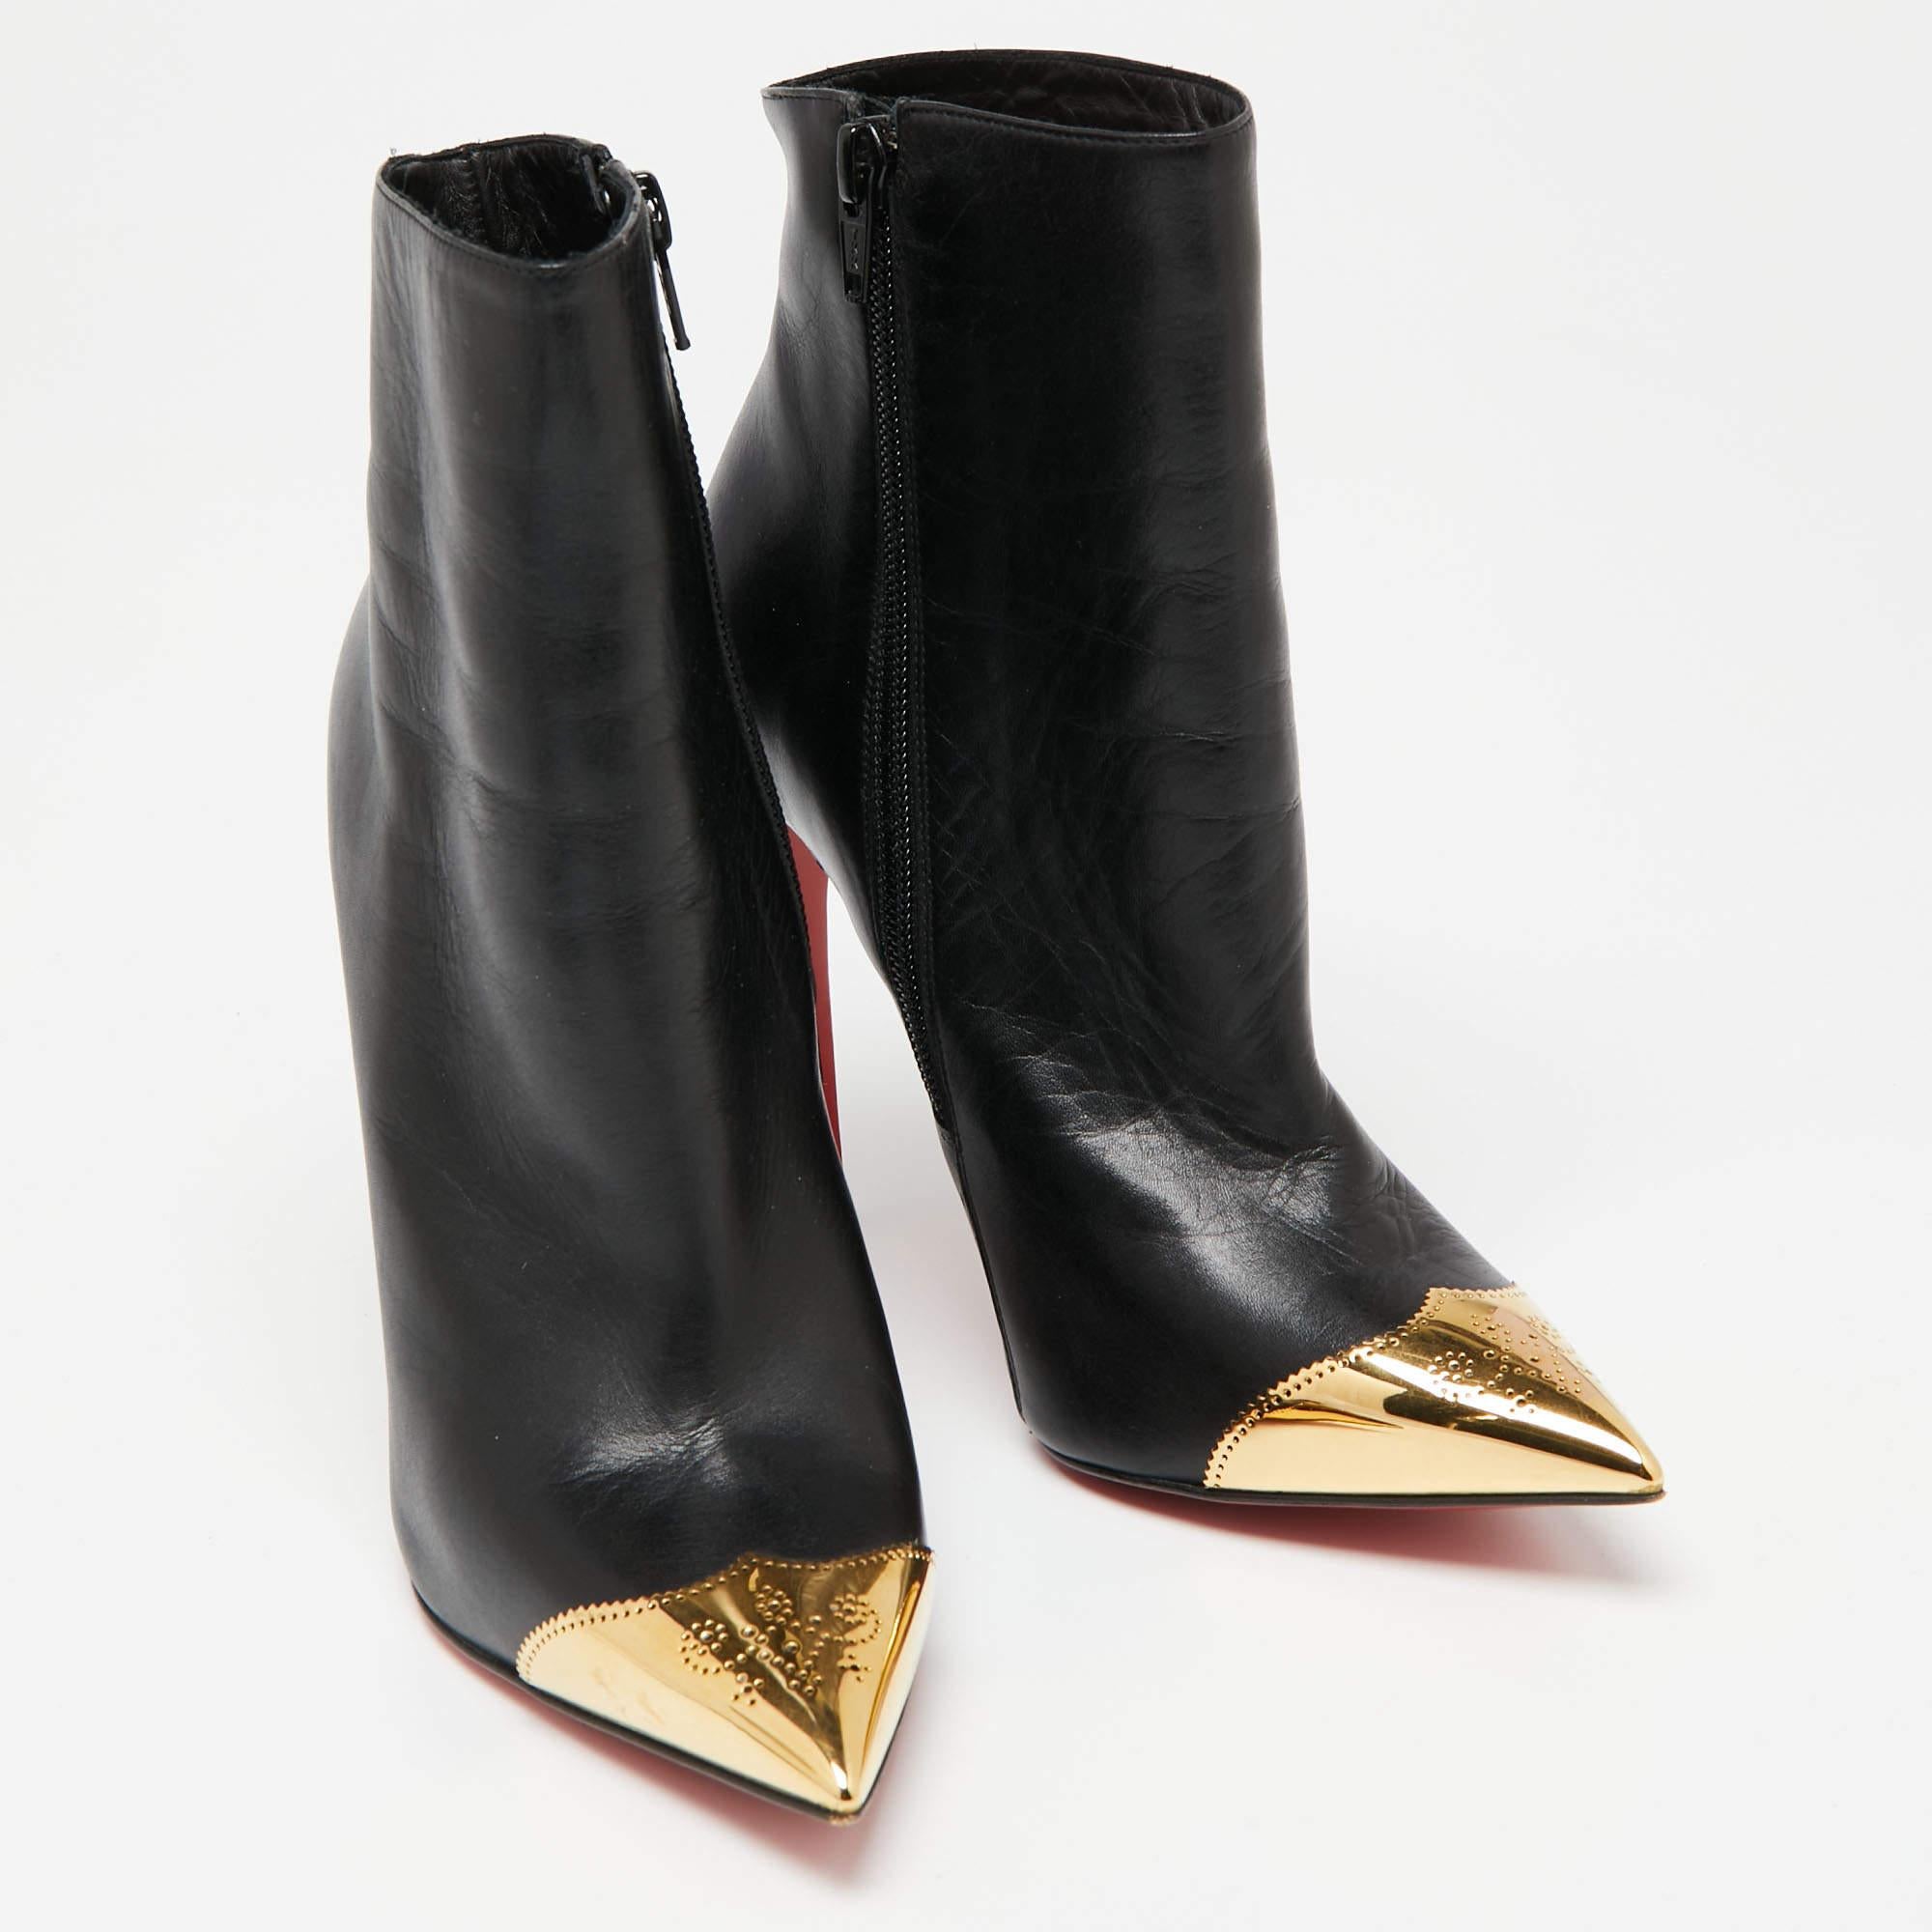 Take every step with panache in these Calamijane booties from Christian Louboutin. They are styled using black leather, with gold-tone detailed toes elevating their beauty. They feature an ankle-length shape, slim heels, and zipper closure. These